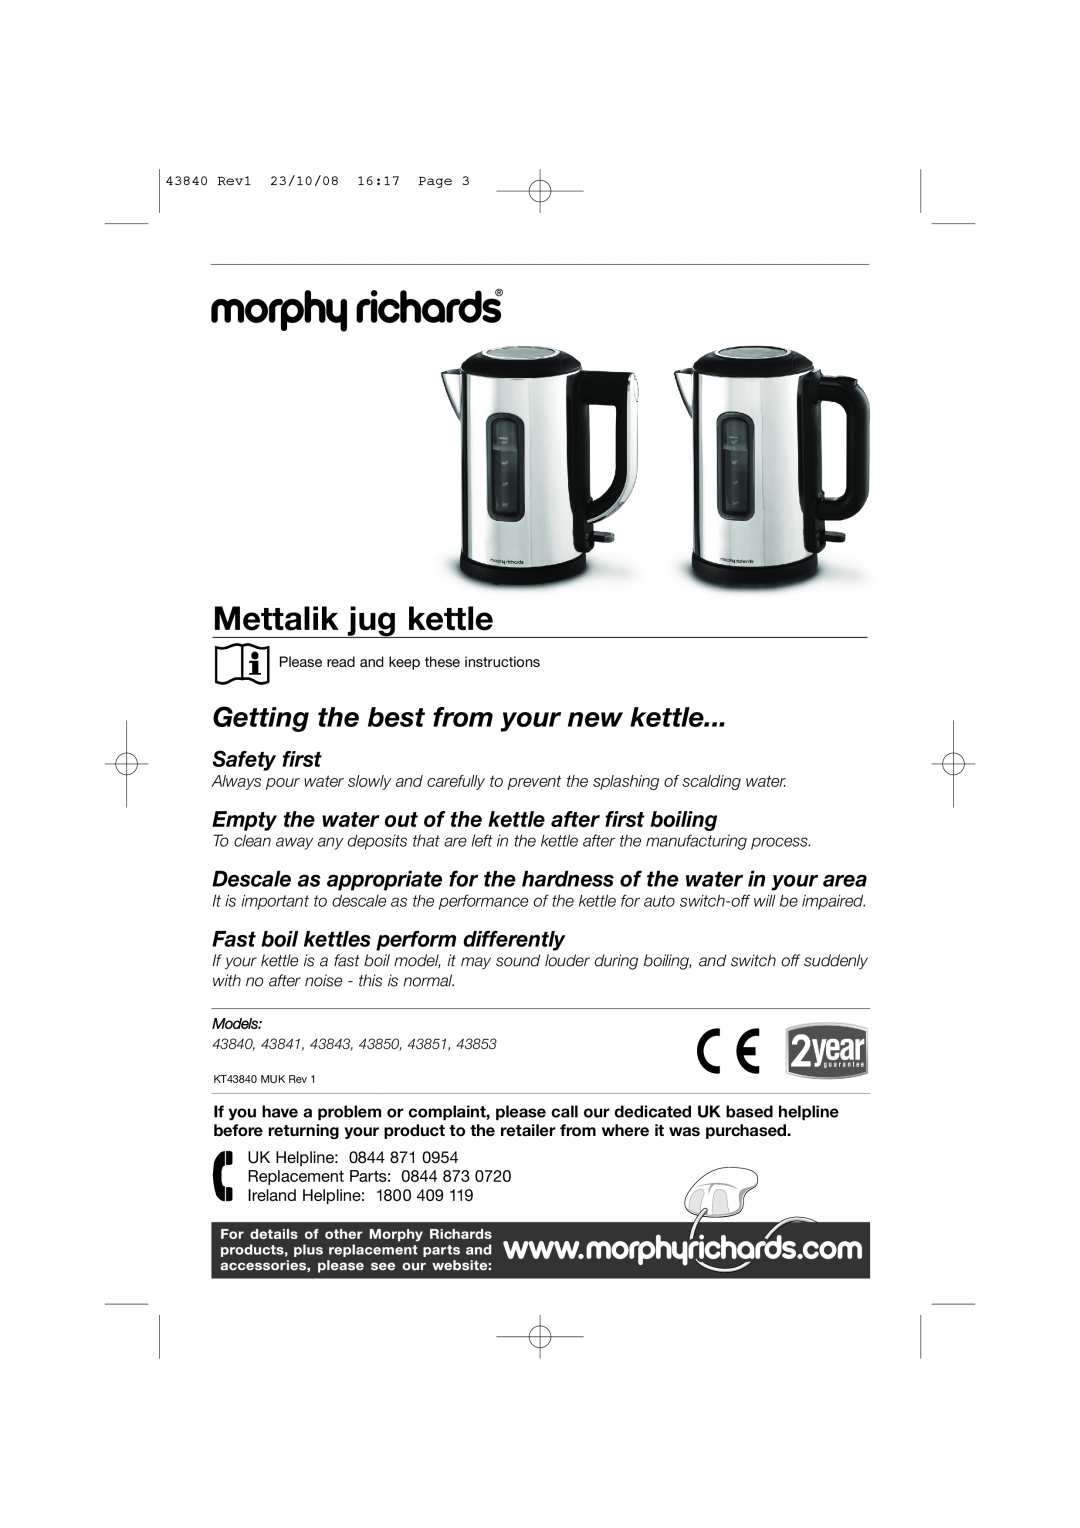 Morphy Richards 0844 873 0720 warranty Mettalik jug kettle, Getting the best from your new kettle, Safety first 